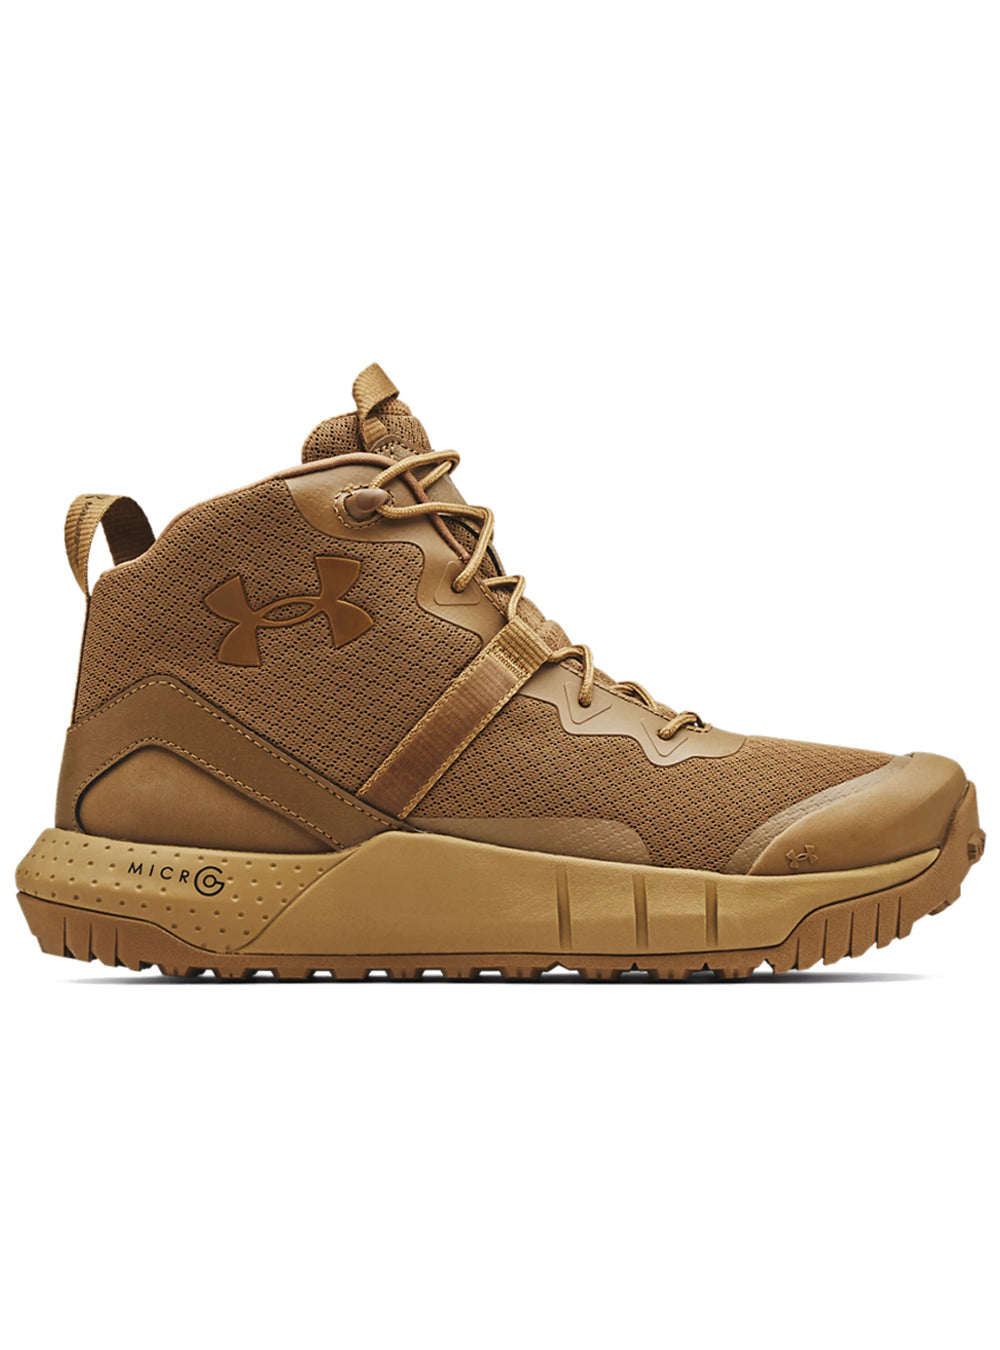 Under Armour Micro G Valsetz Mid - Coyote - TacSource Tactical Gear